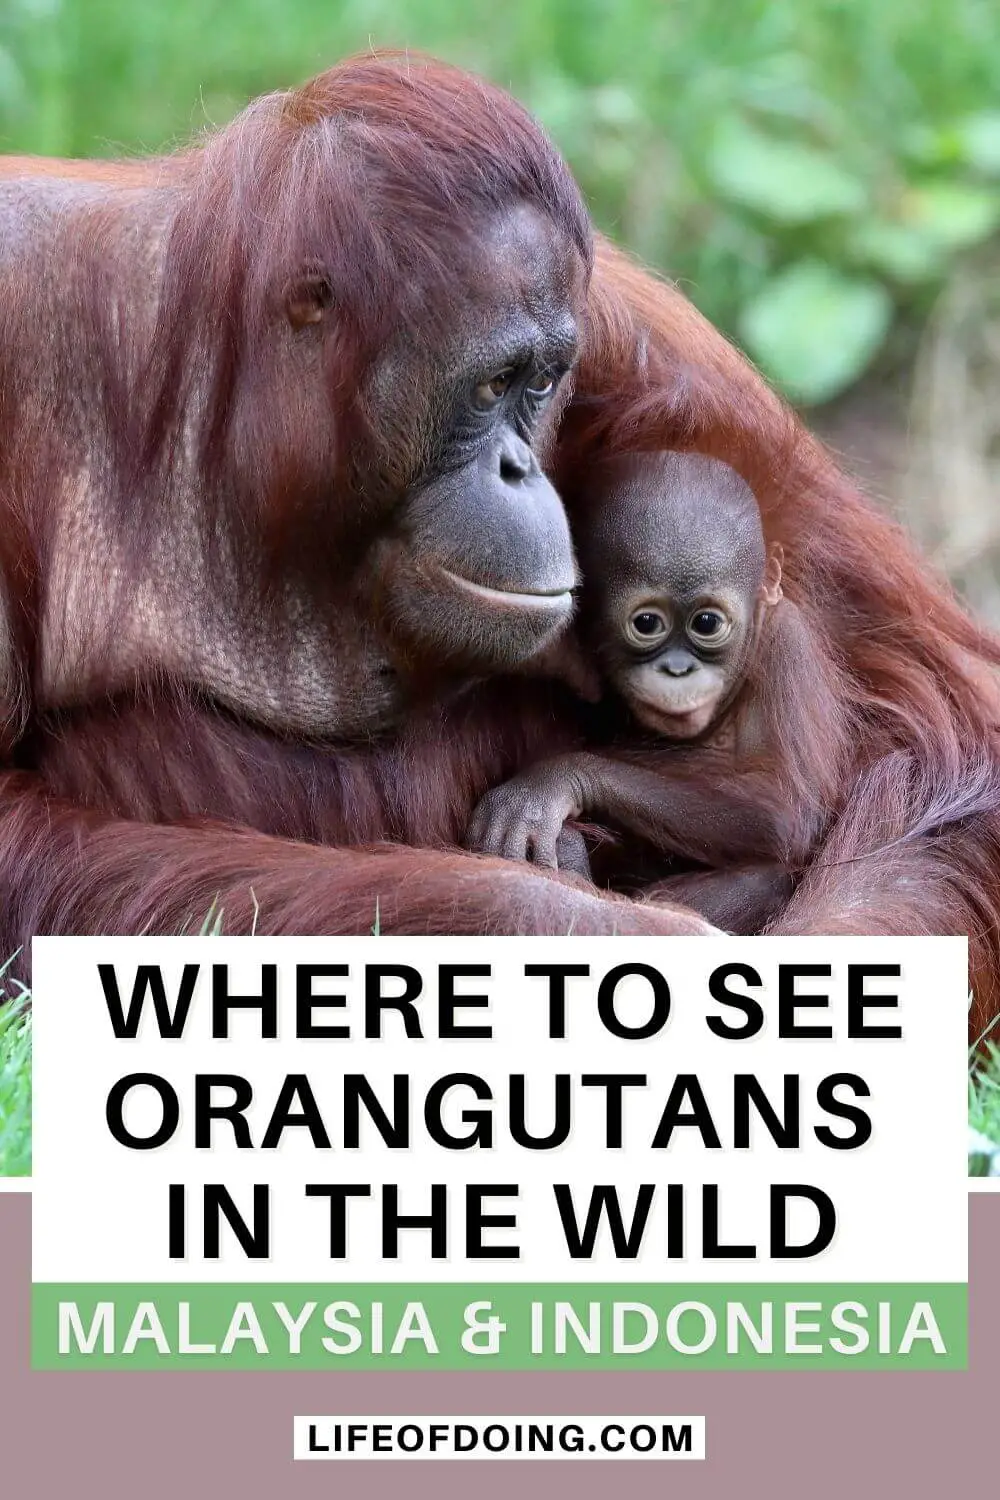 A mother orangutan holding a baby in the wild